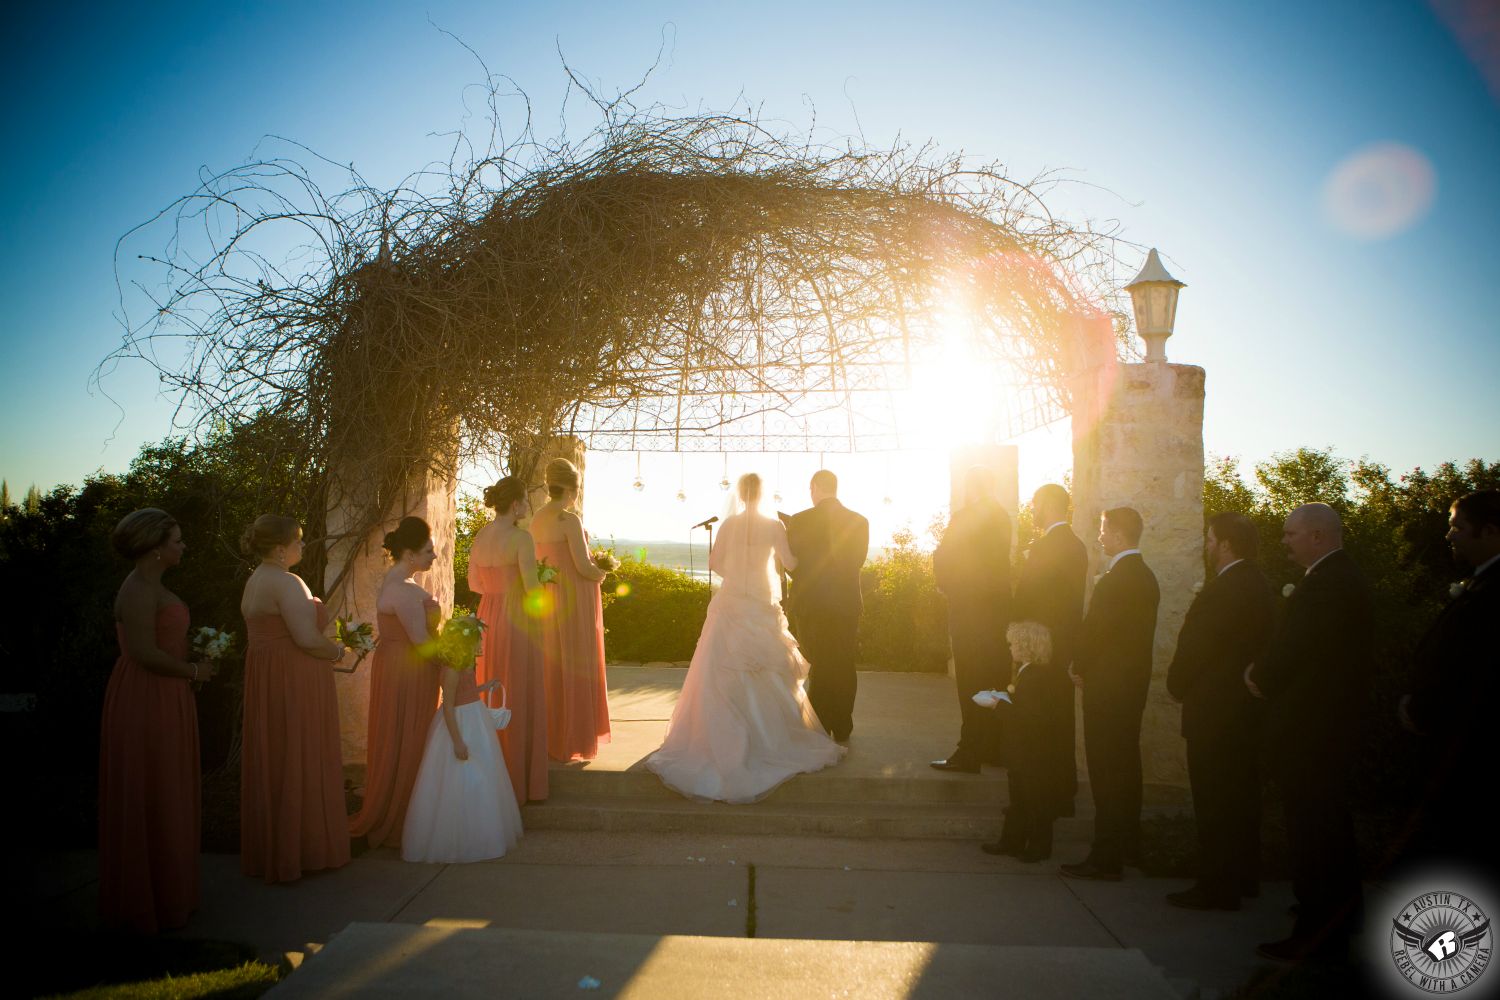 Austin wedding photographers take wedding picture of gorgeous wedding ceremony with bridesmaids in pink dresses and bride in pale pink wedding dress at the outdoor arbor wedding ceremony site at Vintage Villas looking out over Lake Travis with the sunset behind.